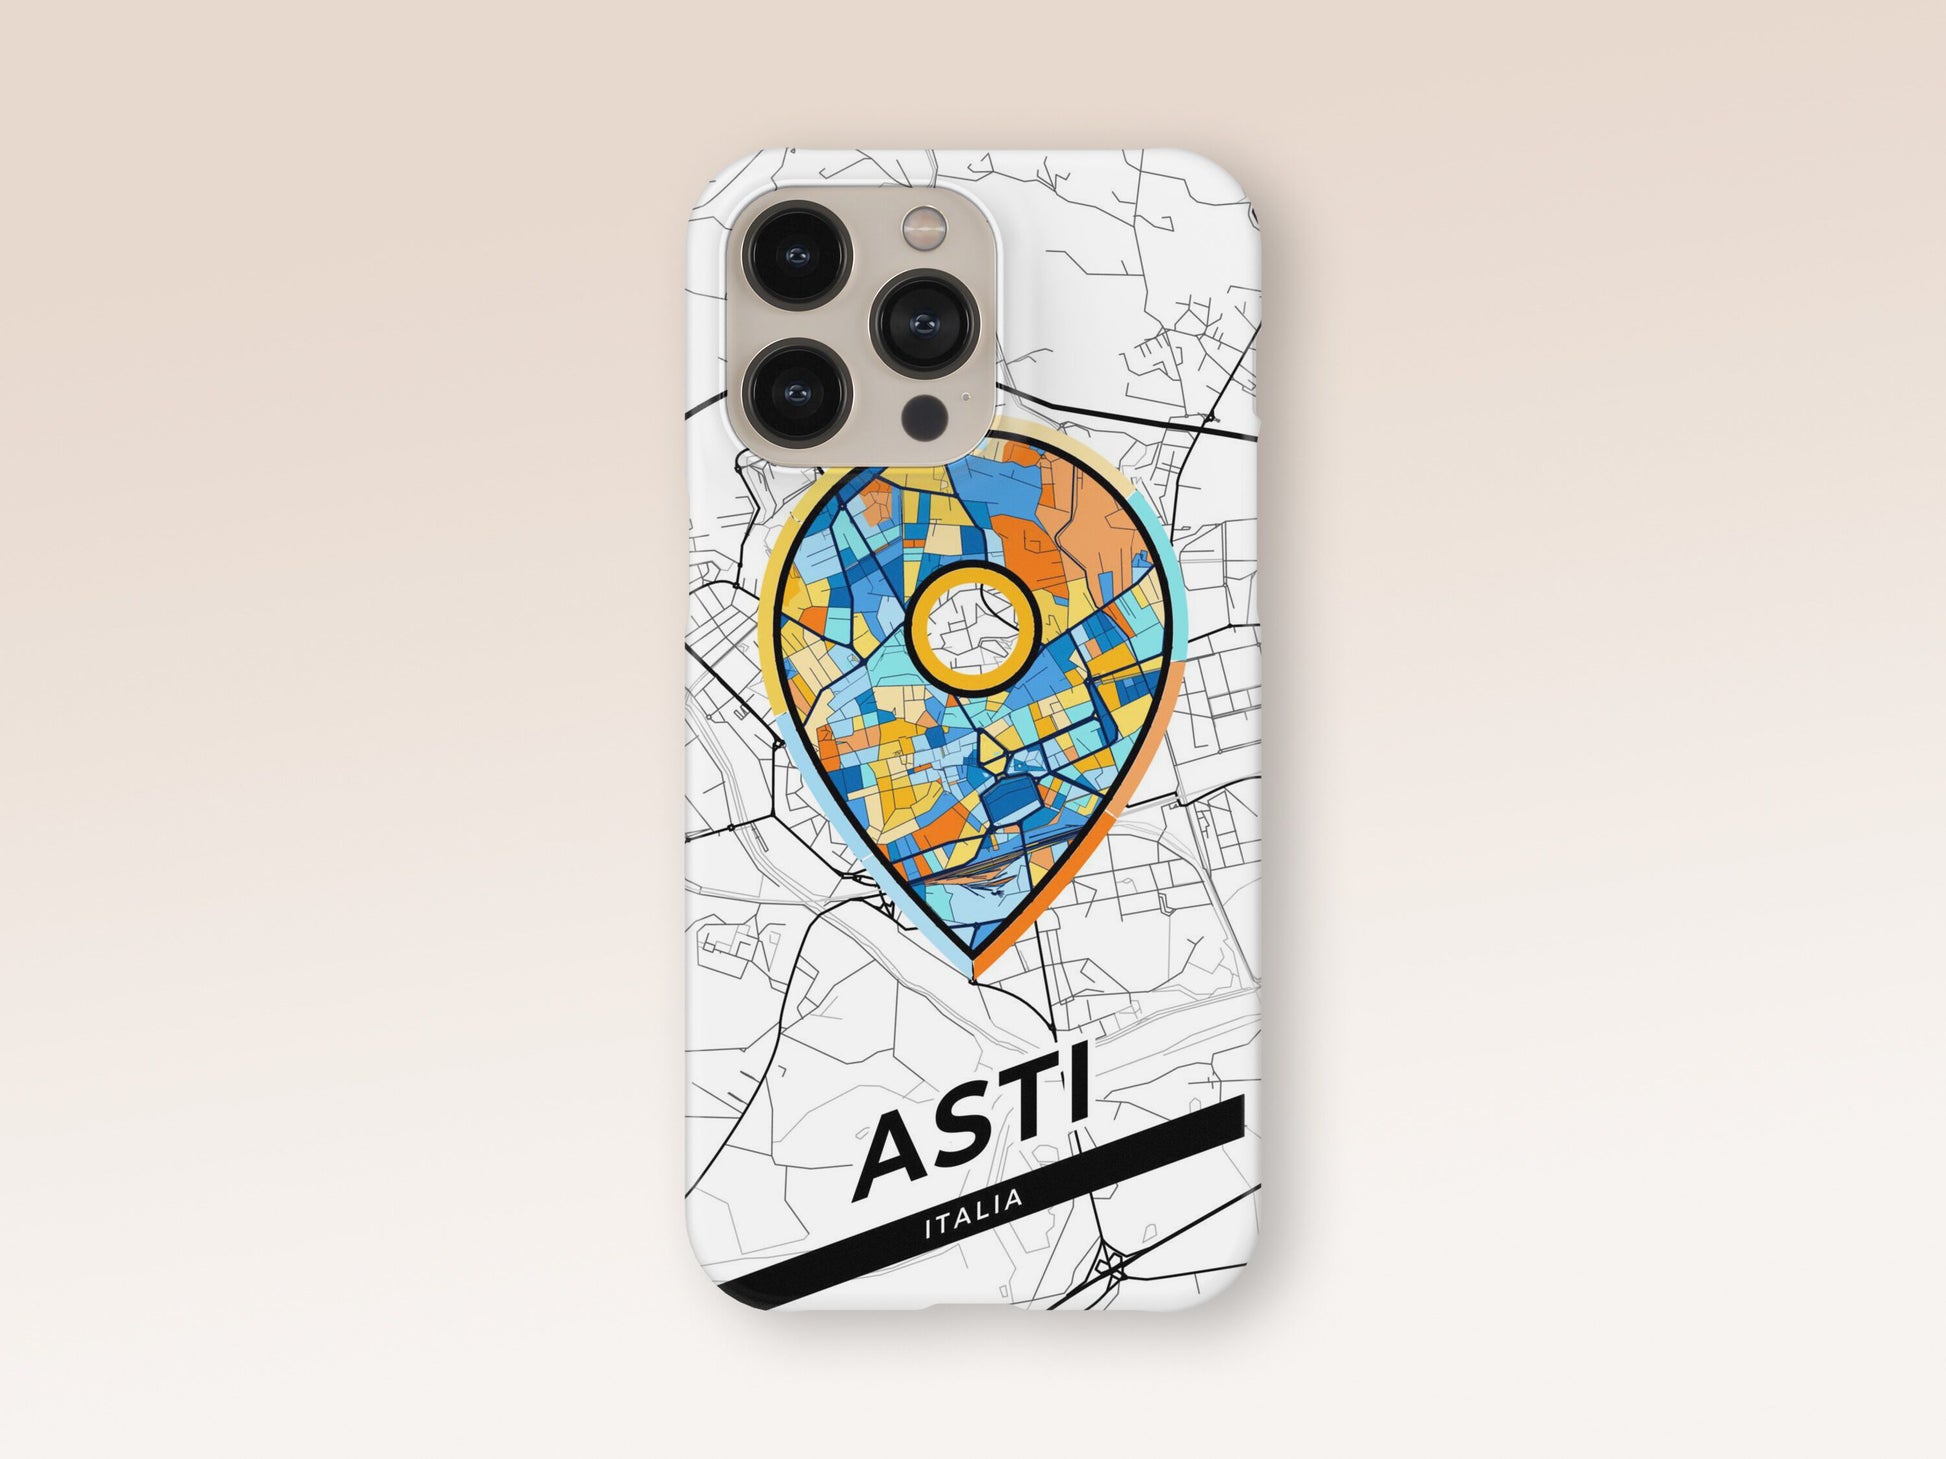 Asti Italy slim phone case with colorful icon. Birthday, wedding or housewarming gift. Couple match cases. 1